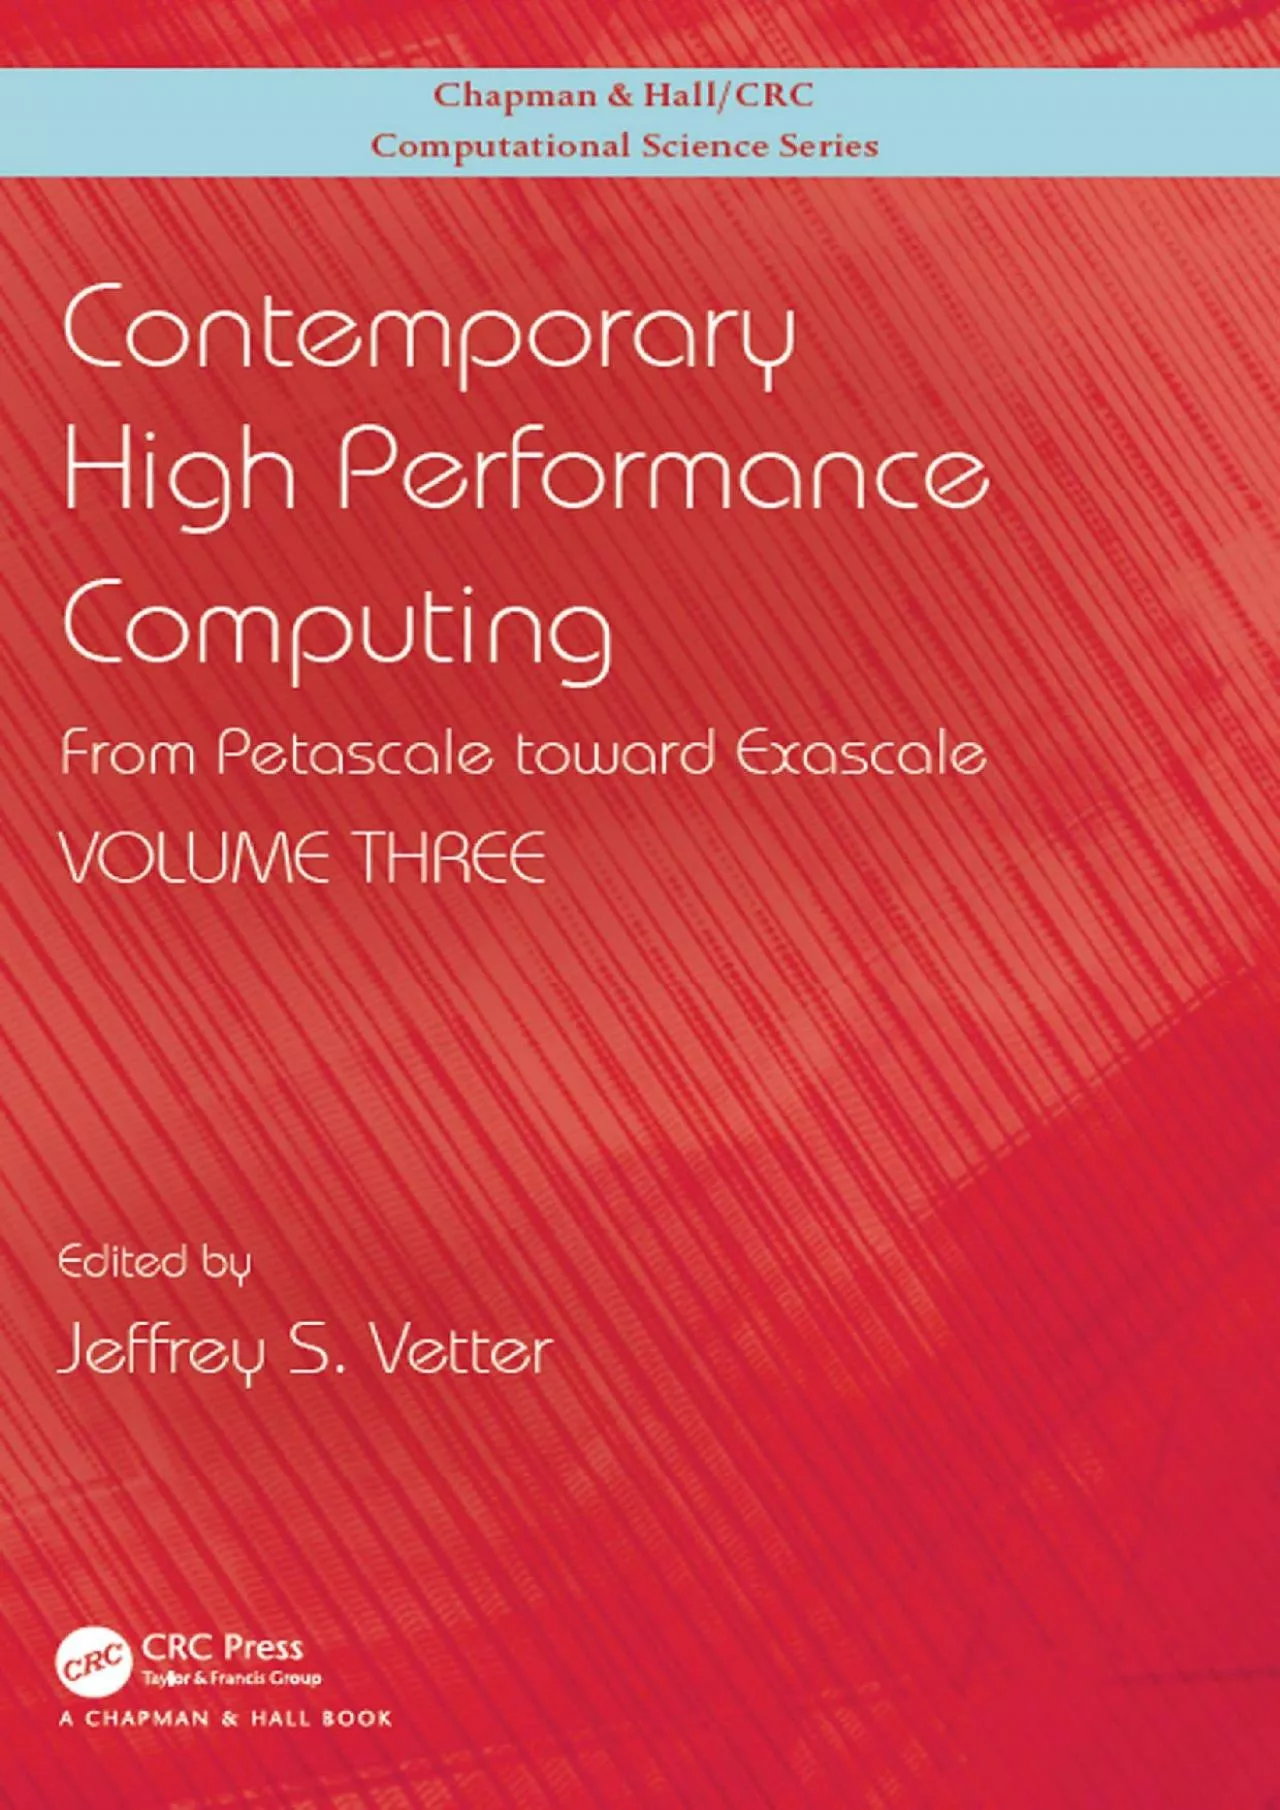 [FREE]-Contemporary High Performance Computing: From Petascale toward Exascale, Volume